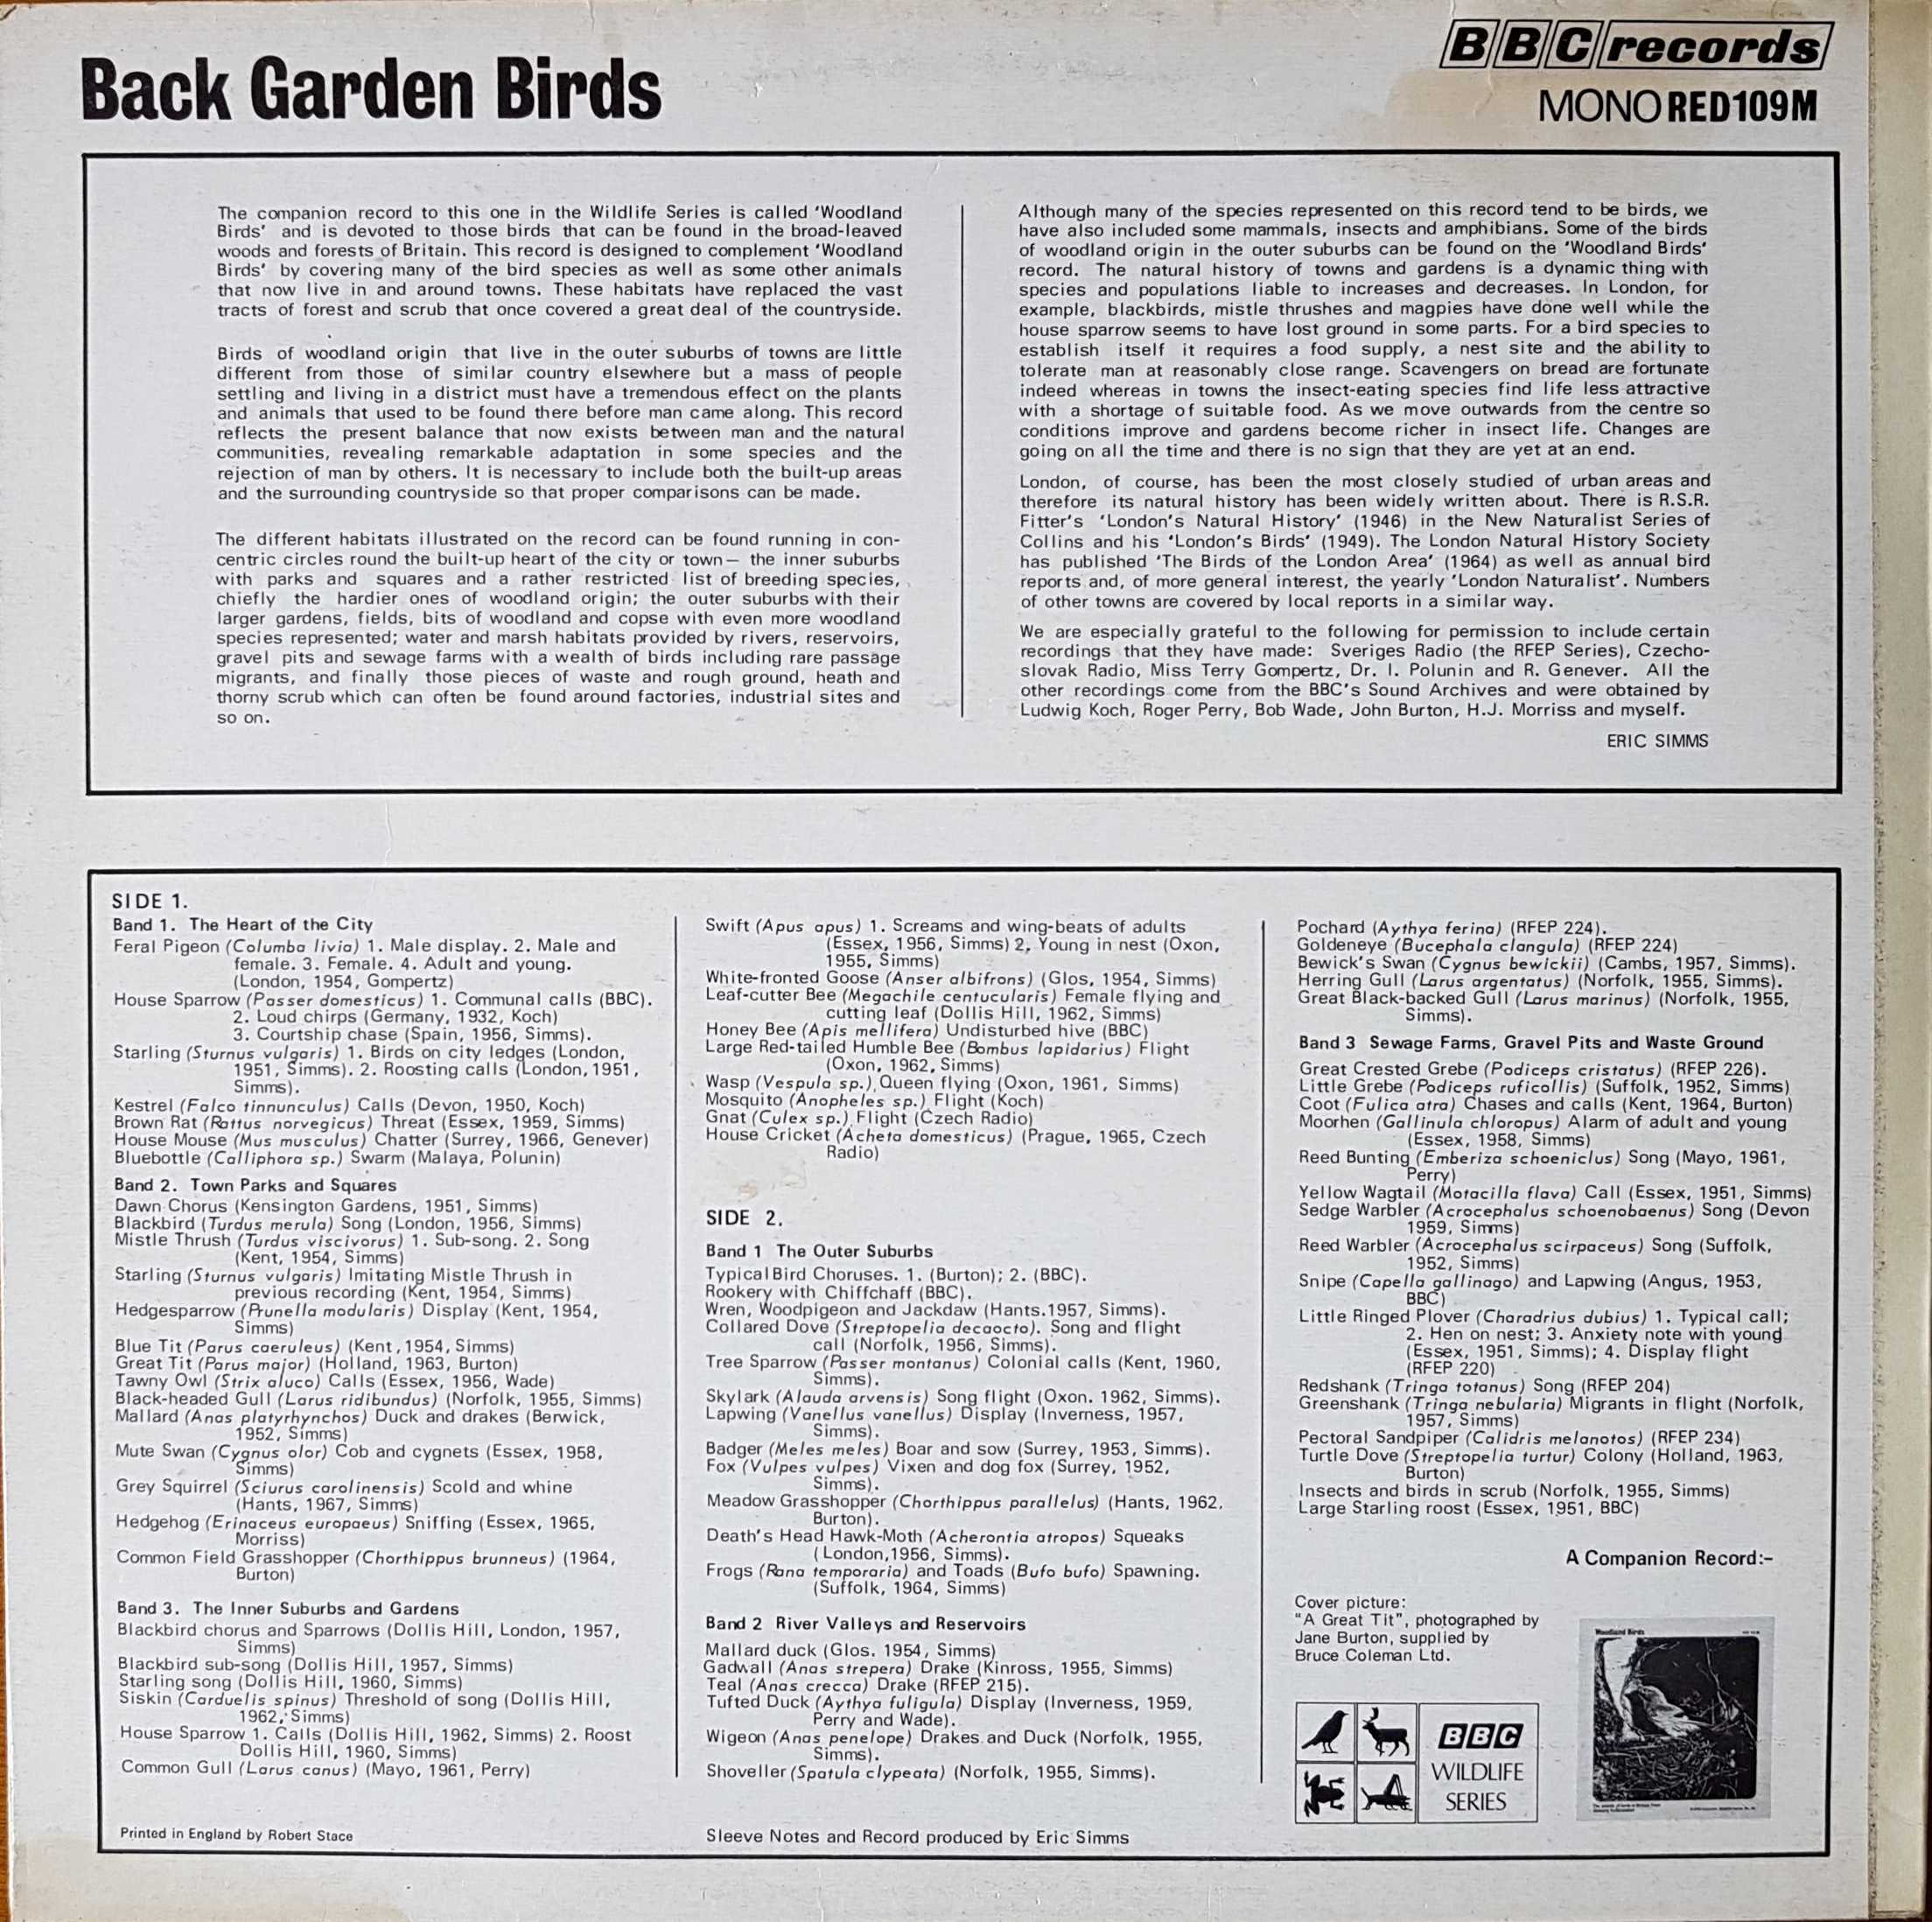 Picture of RED 109 Back garden birds - BBC wildlife series no. 9 by artist Various from the BBC records and Tapes library